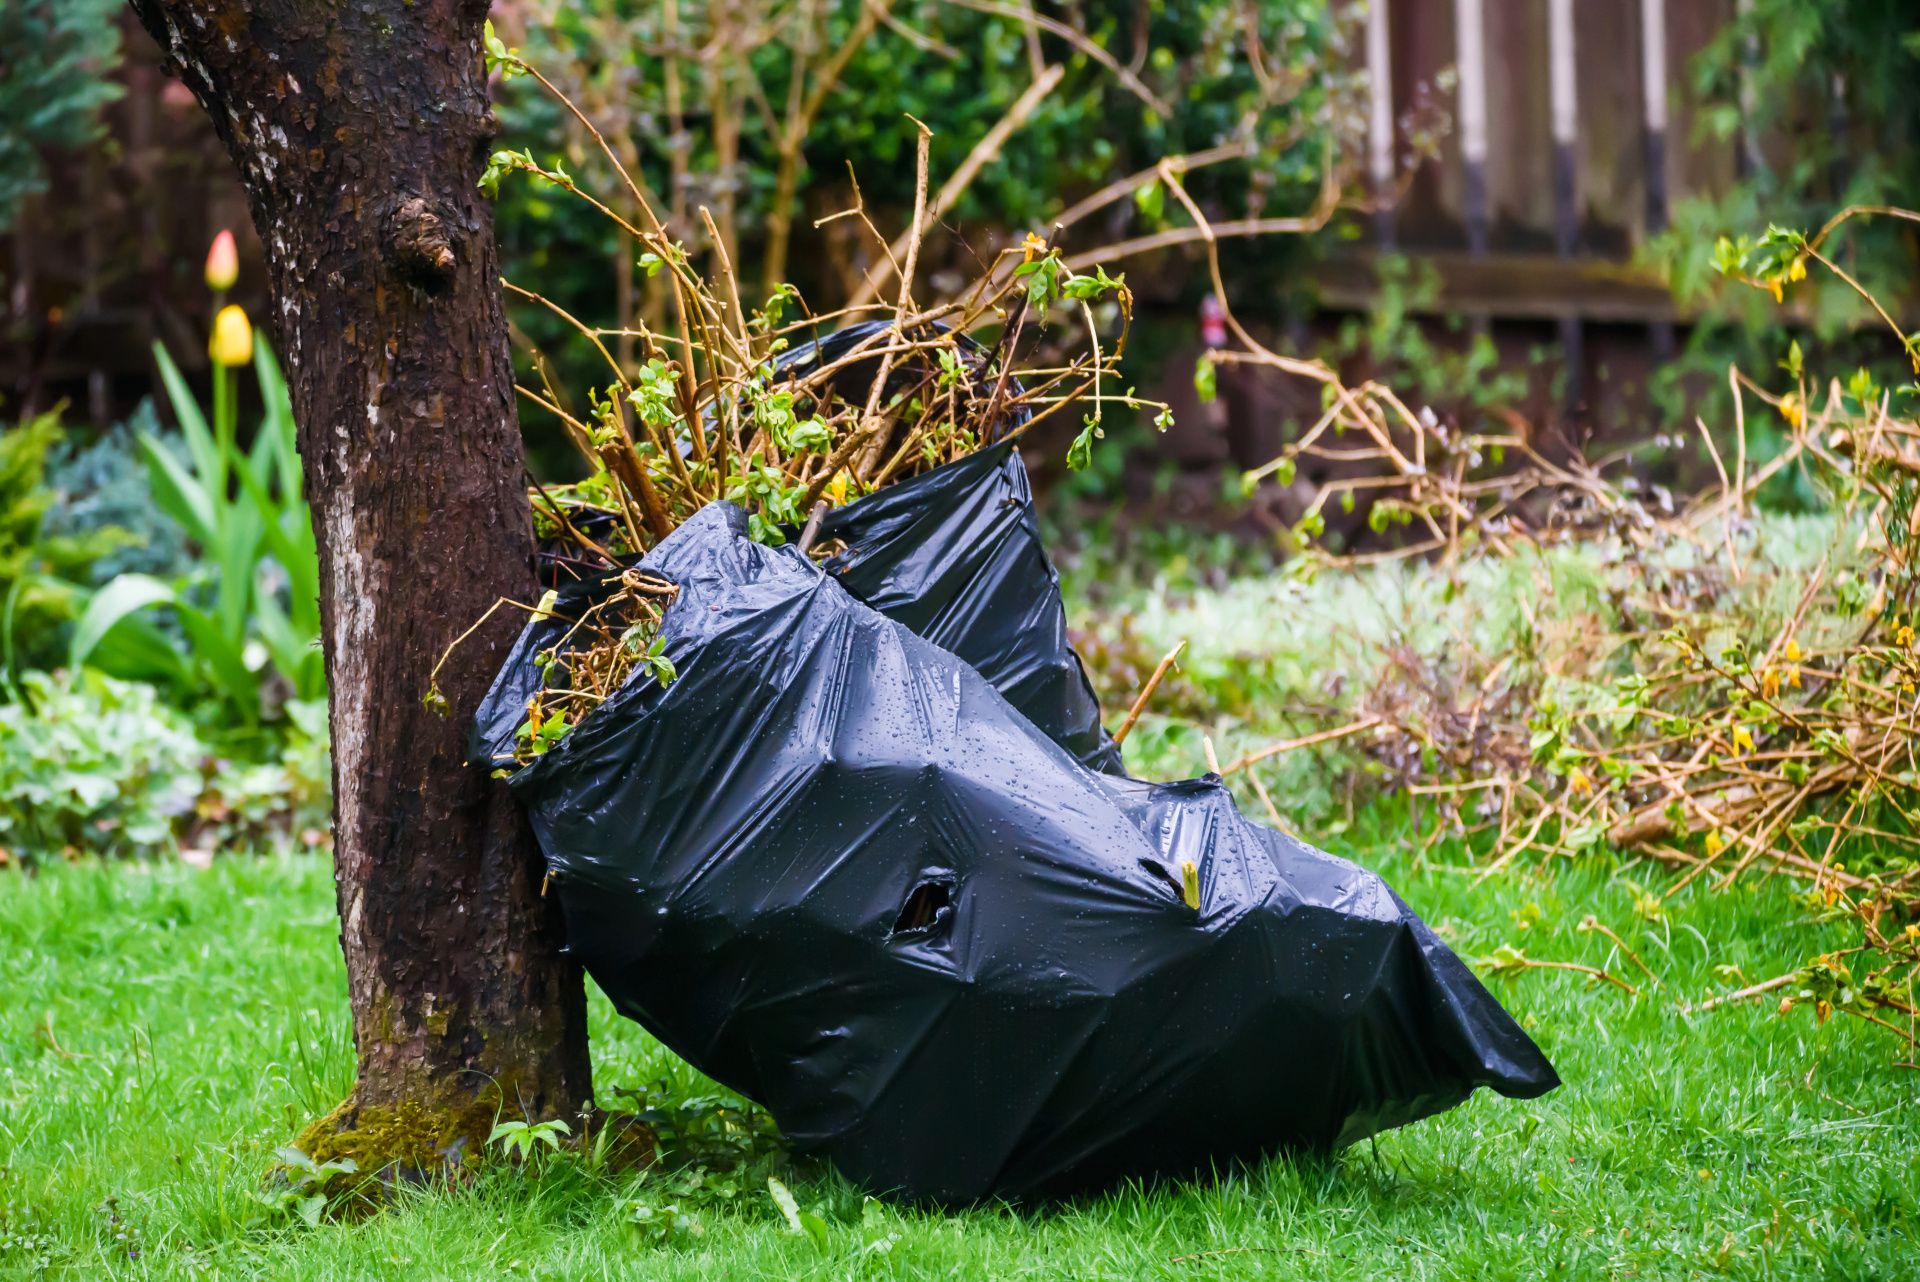 rubbish bag filled with garden waste leaning against a tree